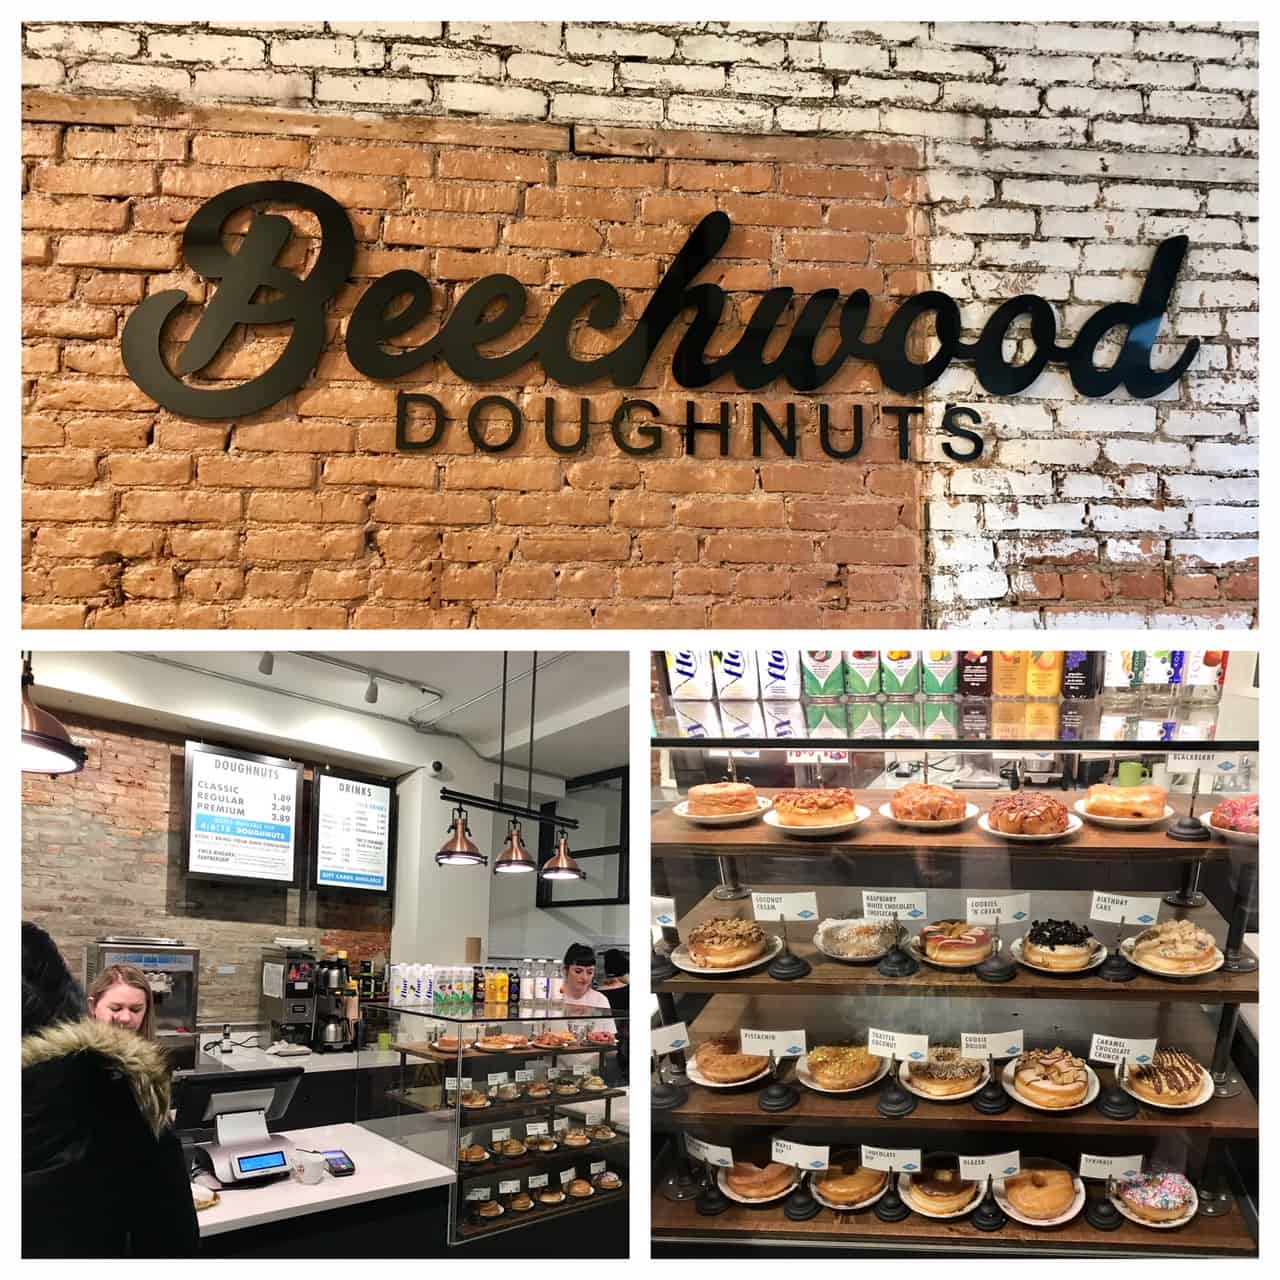 Collage of images from Beechwood Doughnuts